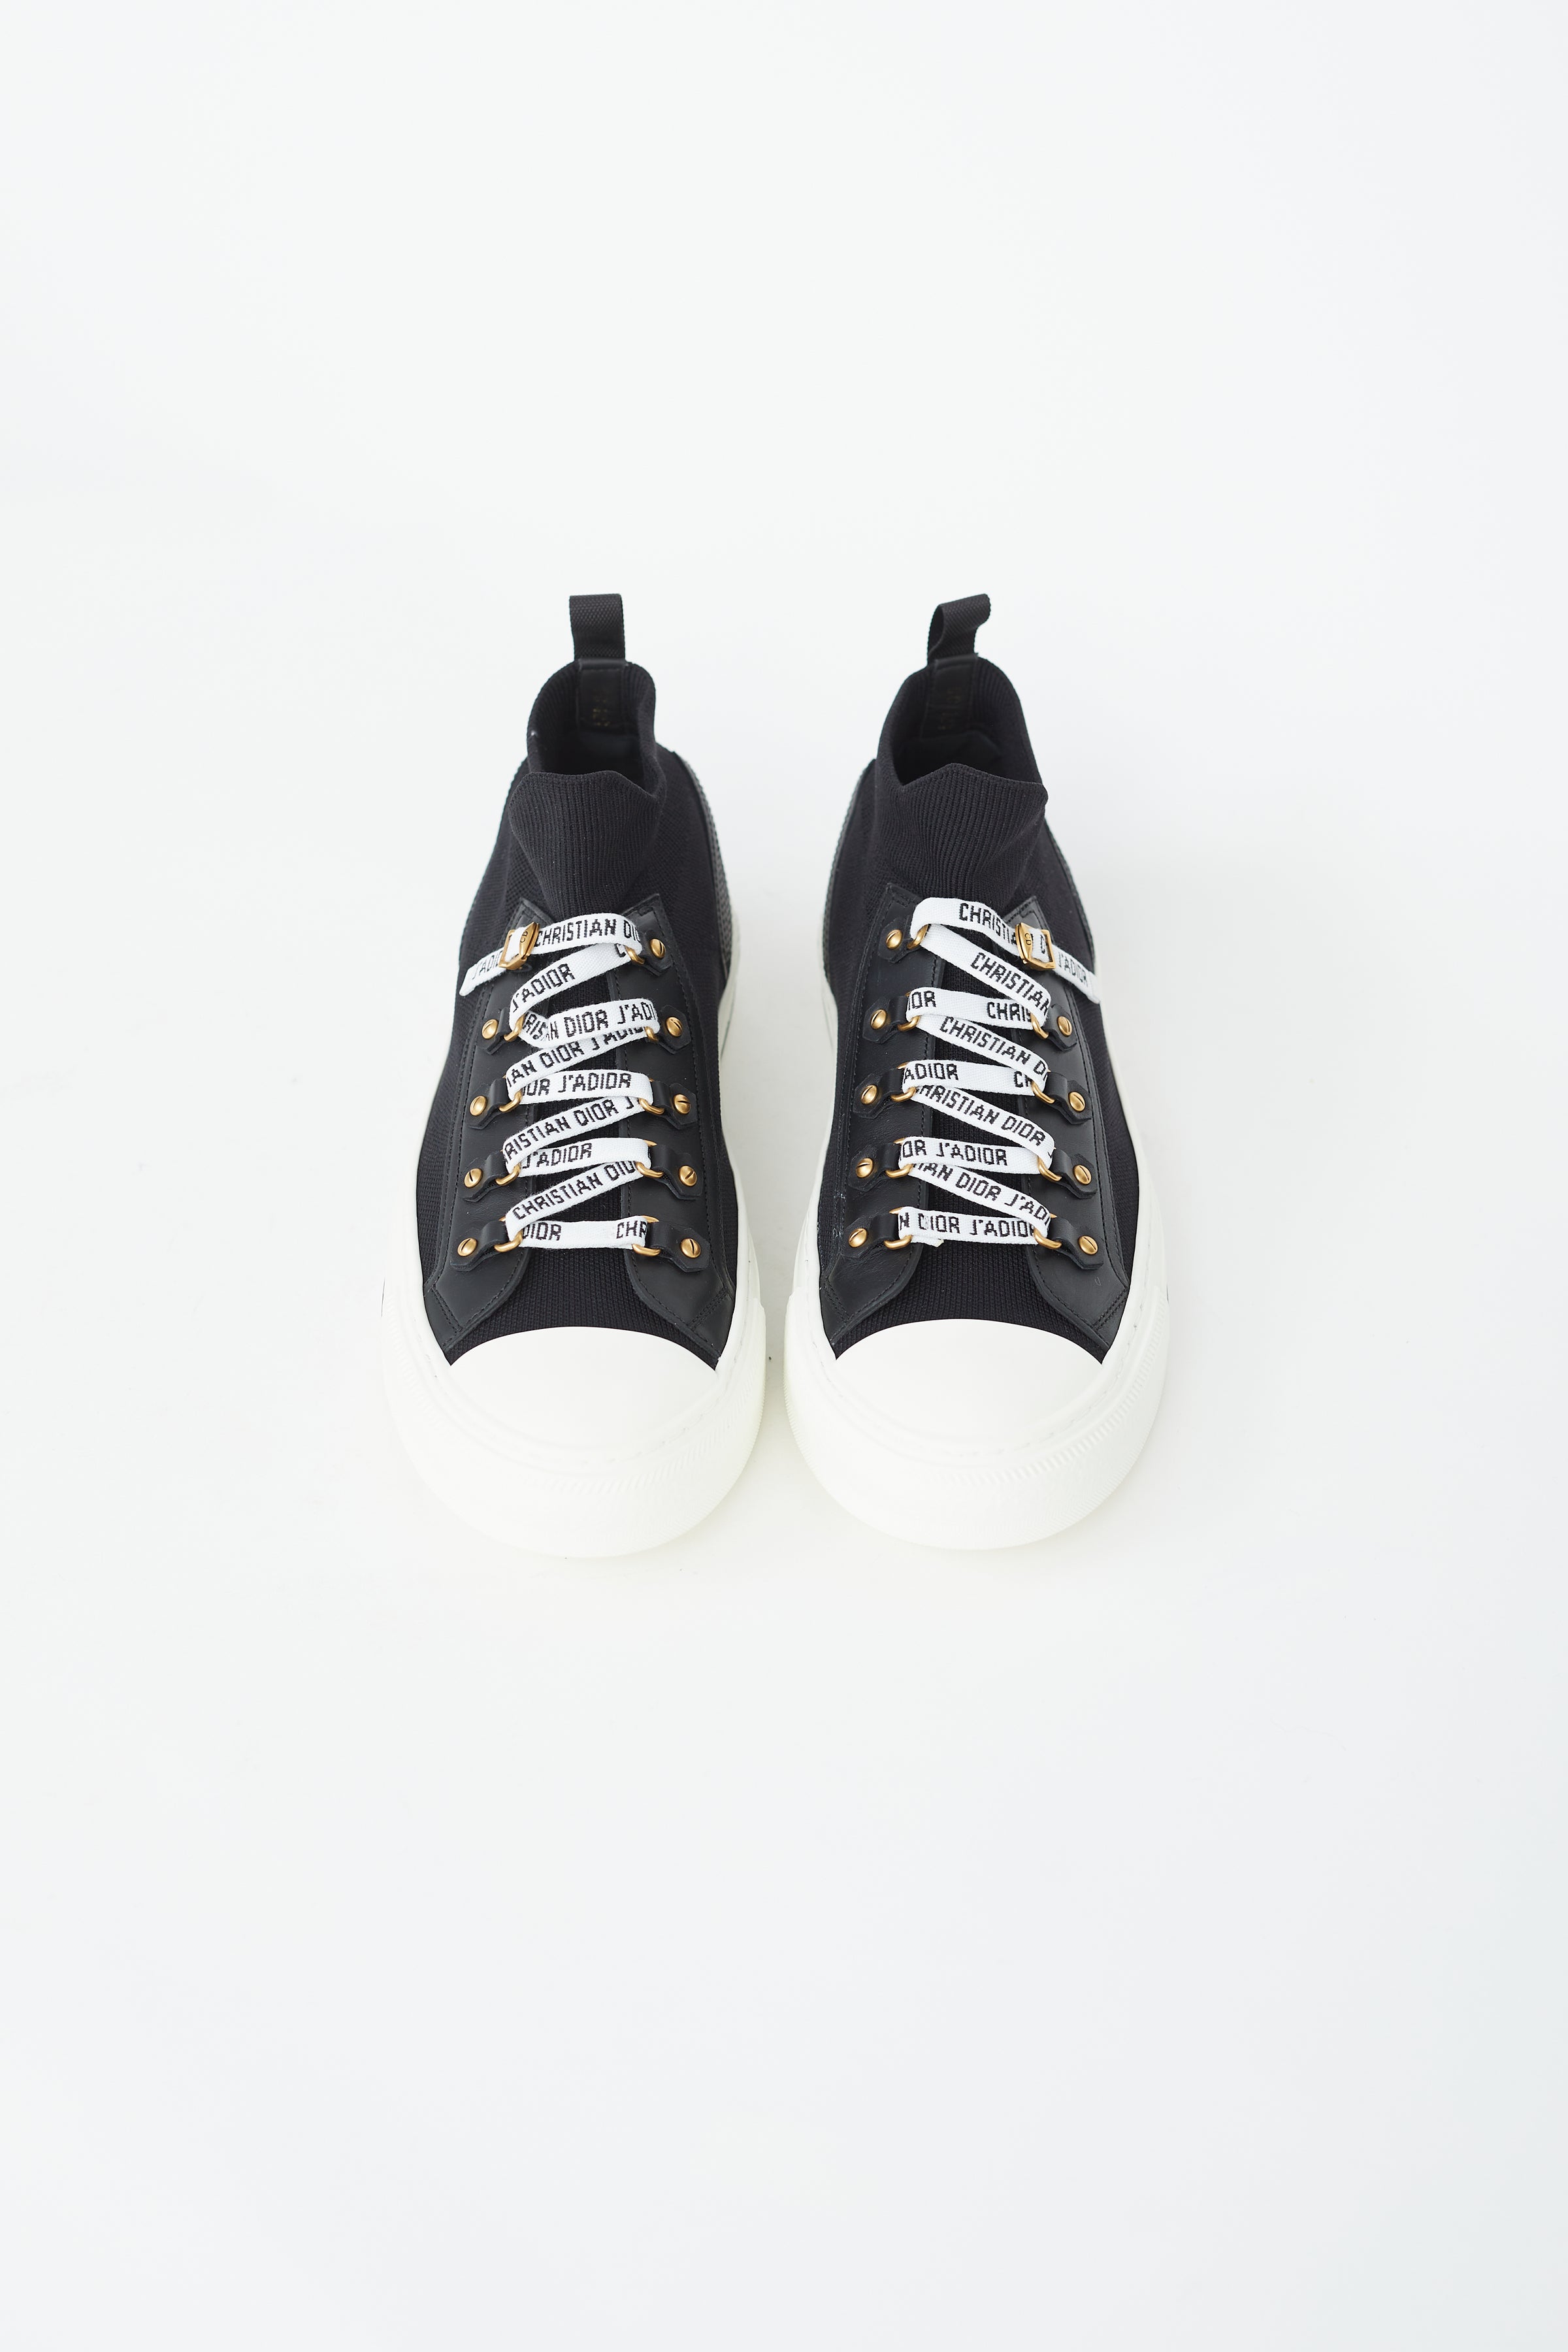 Dior  DIOR HIGHTOP SNEAKER B06  HBX  Globally Curated Fashion and  Lifestyle by Hypebeast